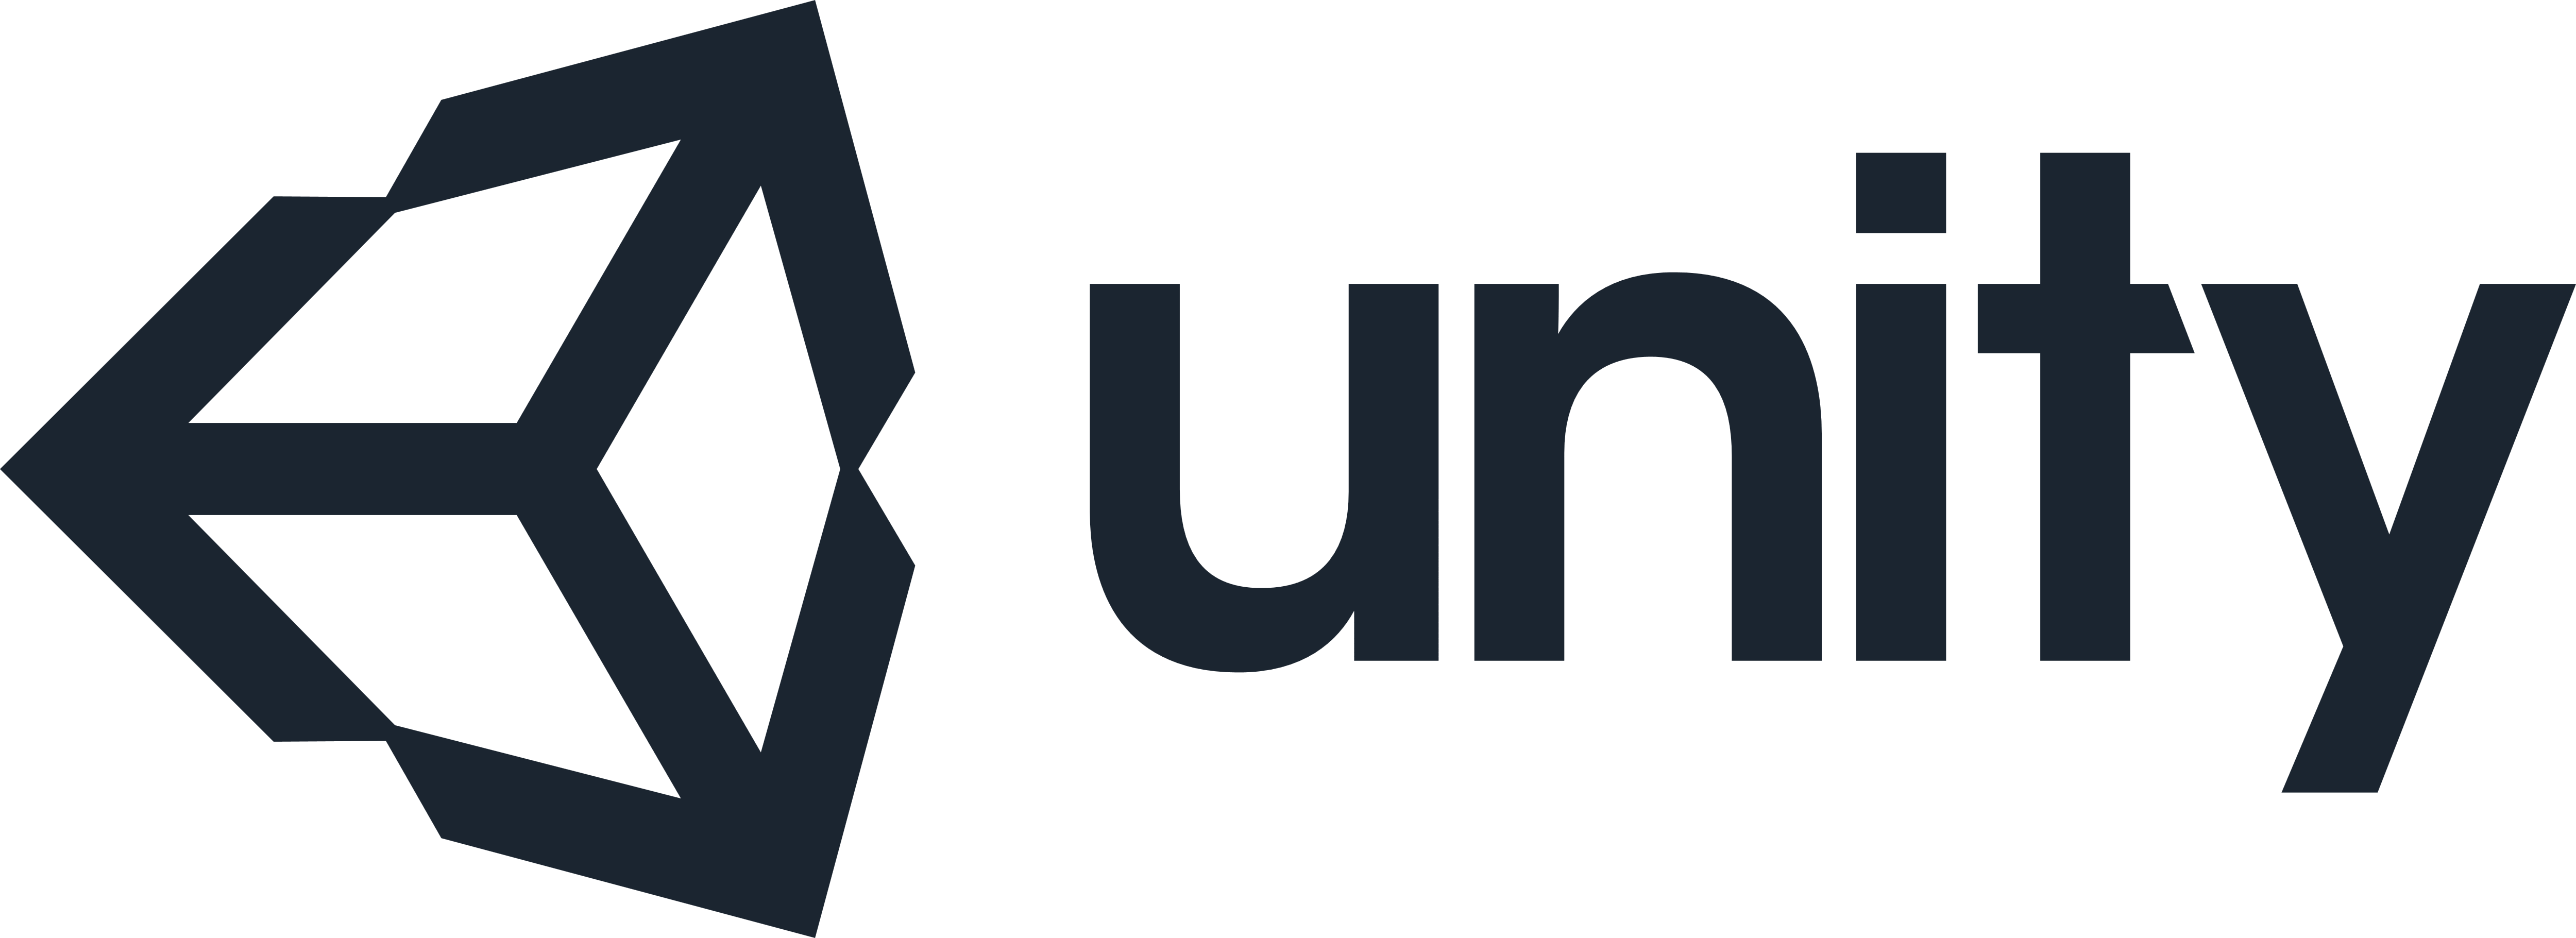 download unity full version